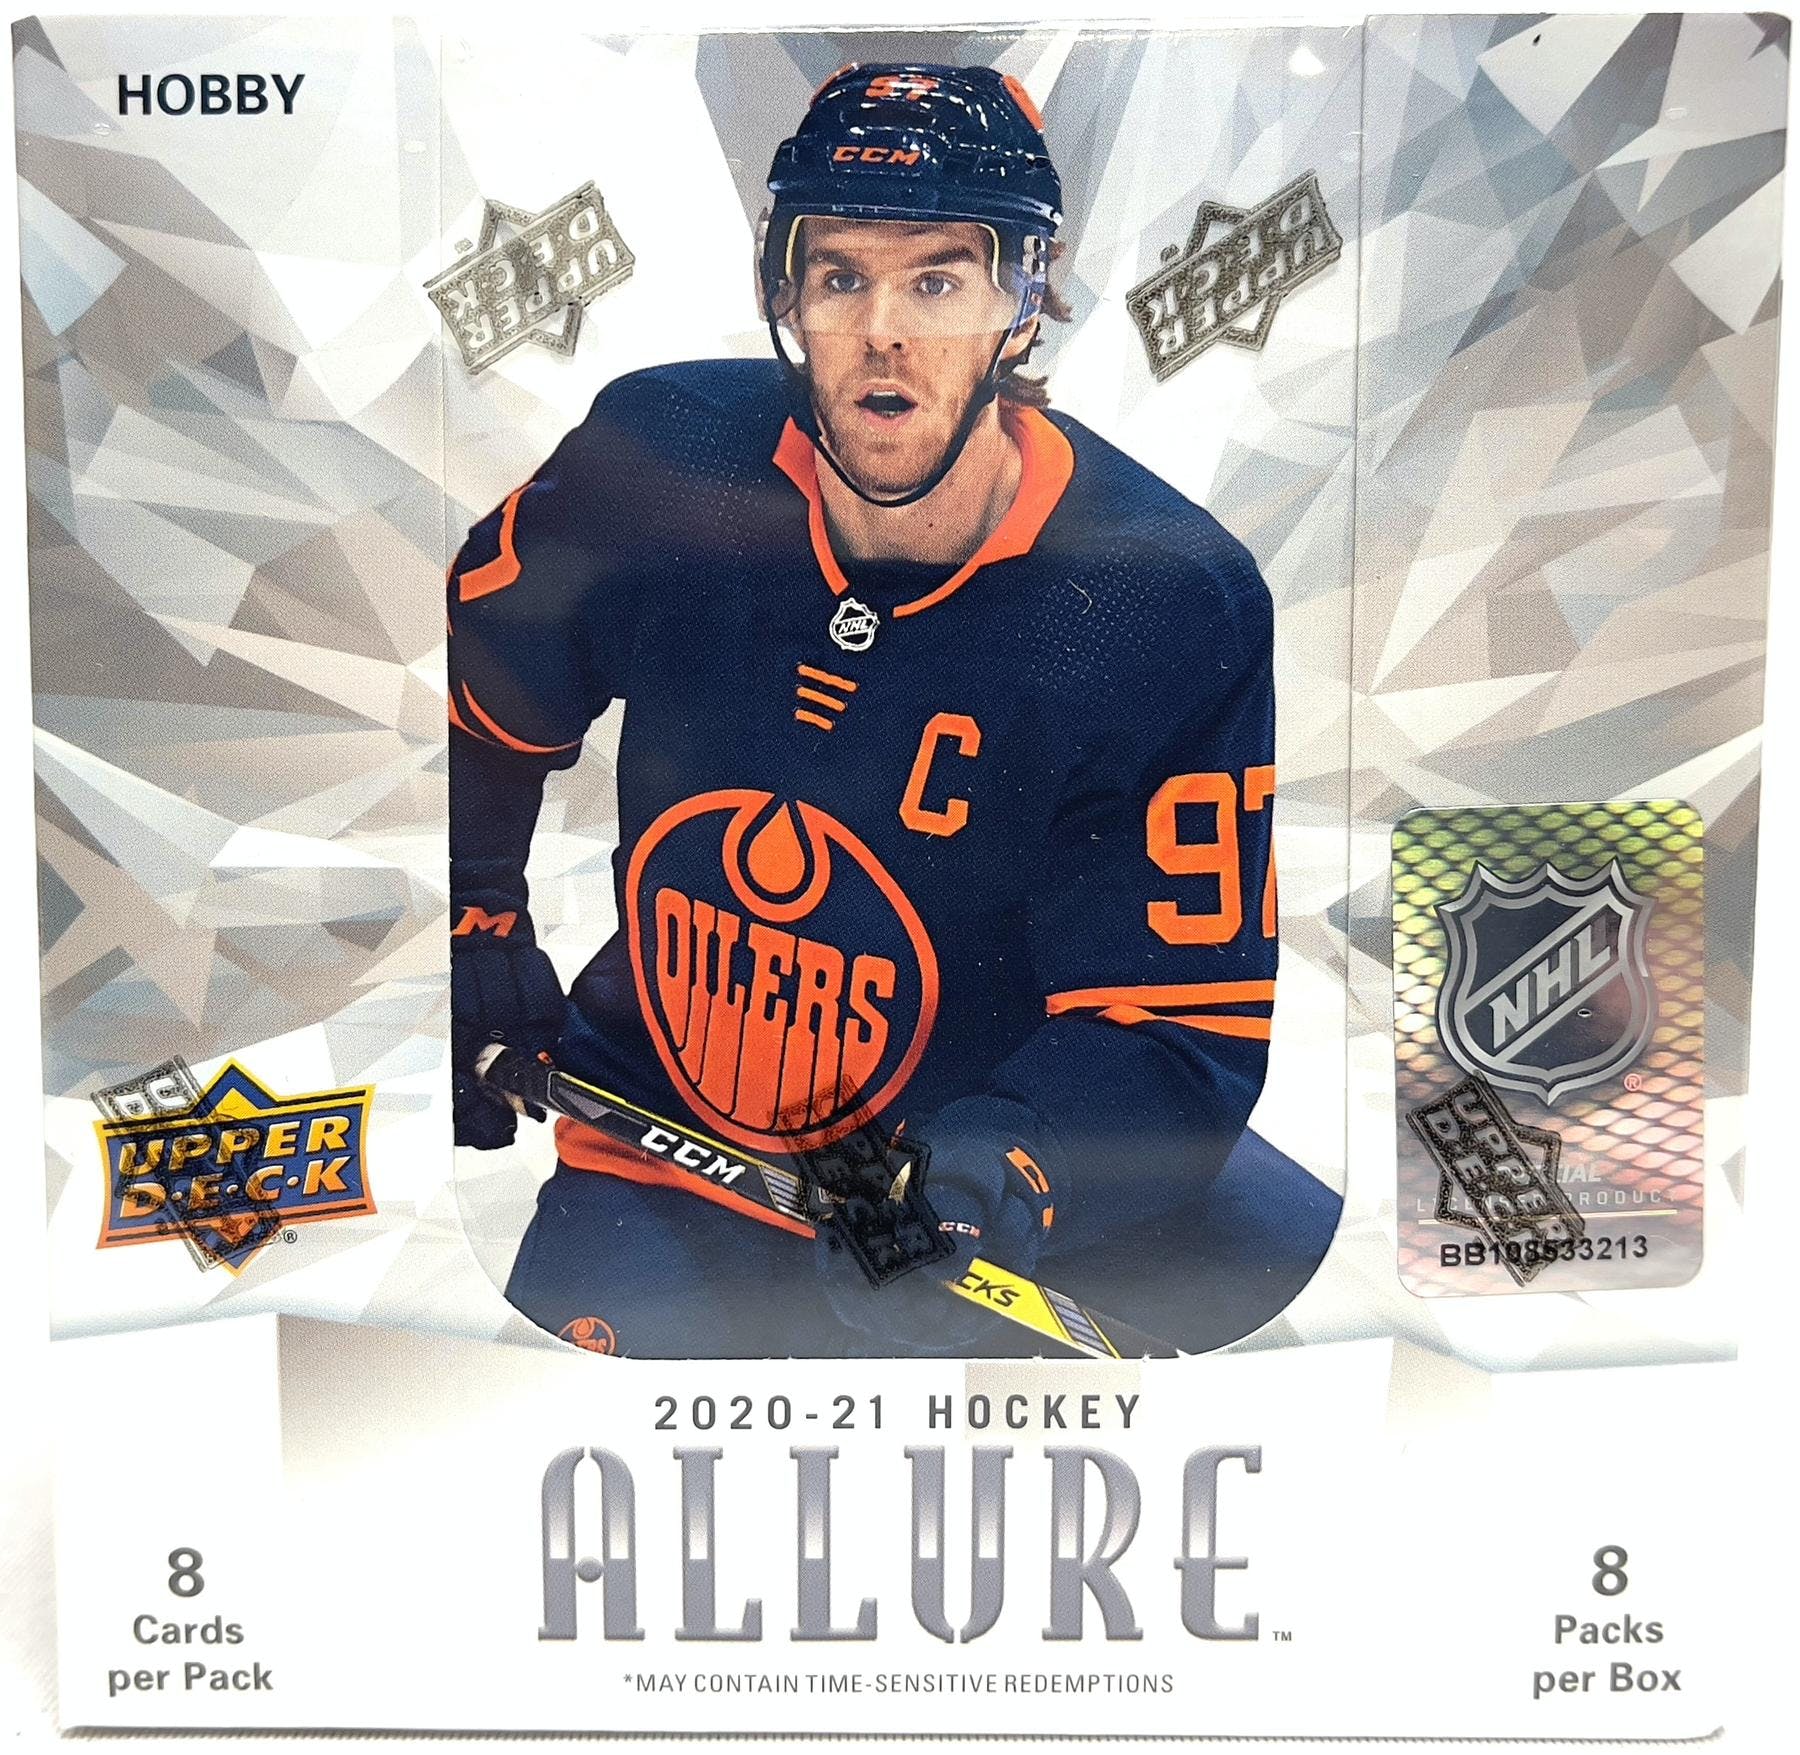 2020-21 Upper Deck Allure Hockey Hobby Box | Columbia Sports Cards & More.